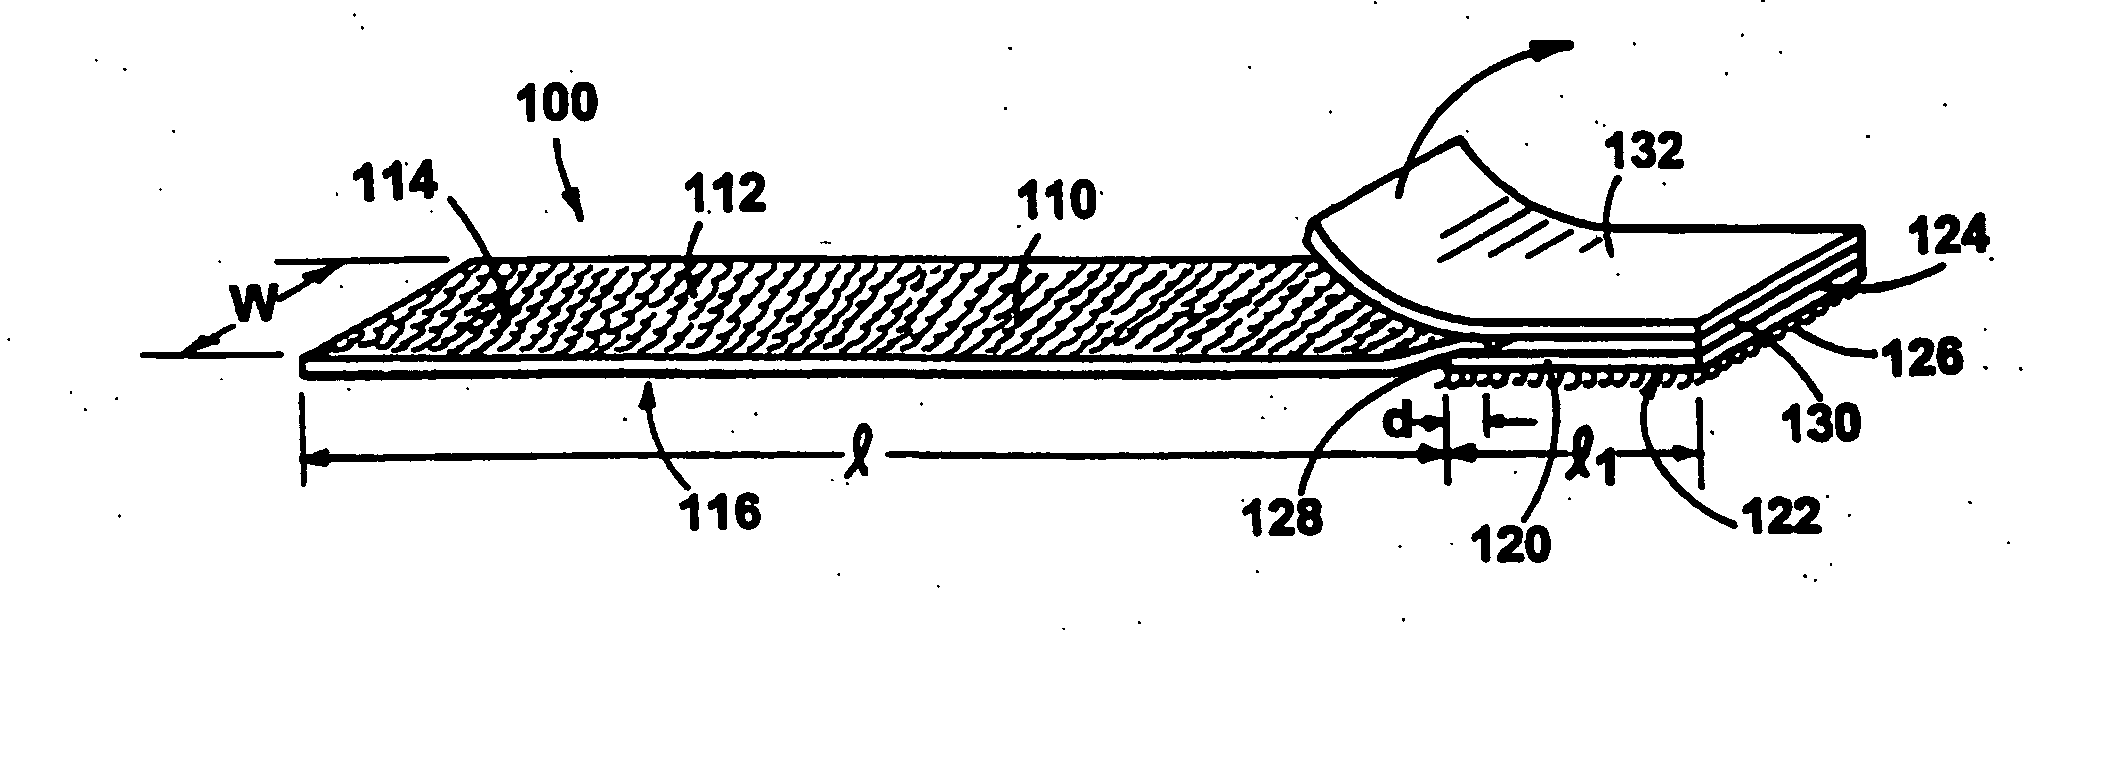 Composite touch fasteners and methods of their manufacture